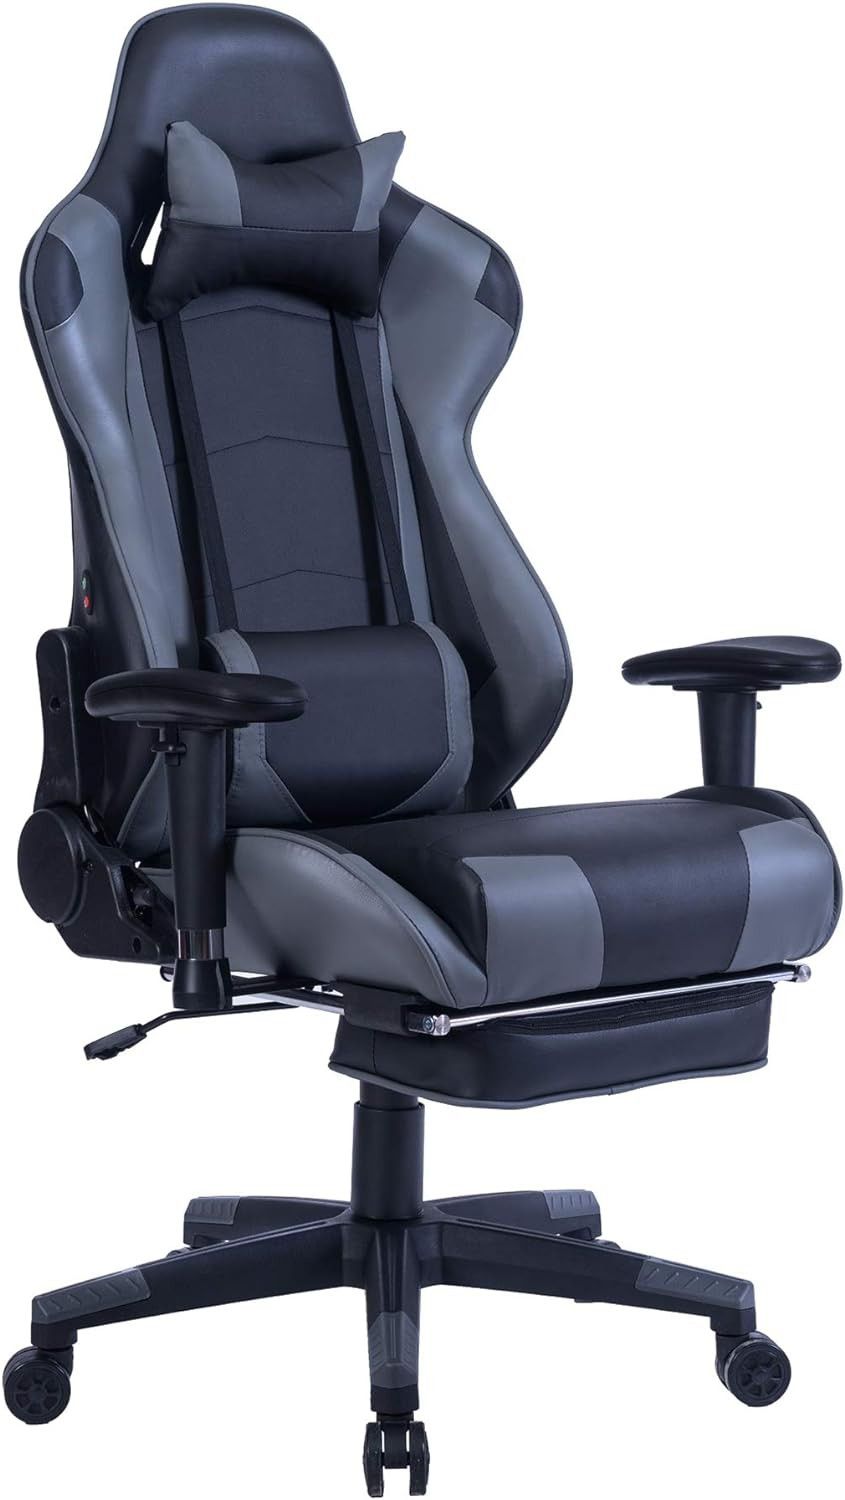 HEALGEN Back Massage Gaming Chair with Footrest, High Back Reclining, Ergonomic with Headrest and Lumbar Support Cushion